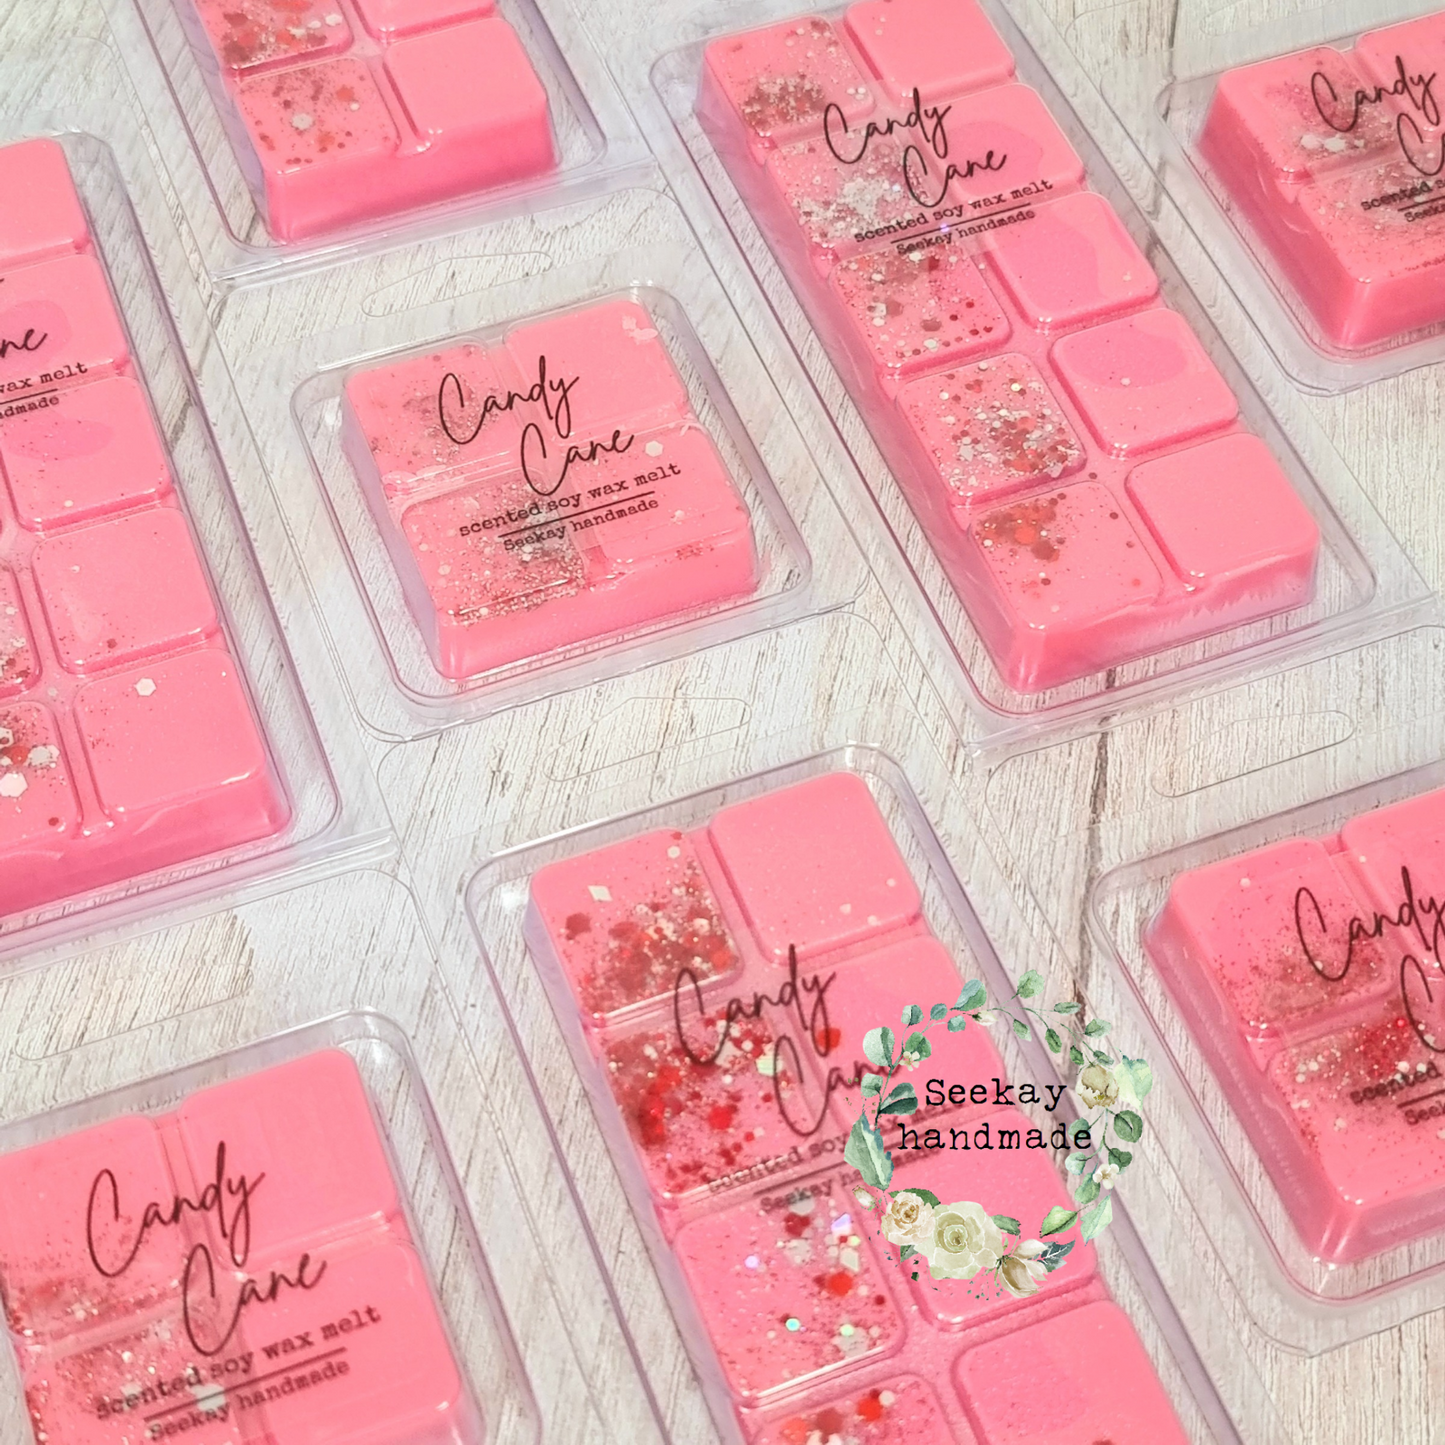 Candy Cane scented soy wax melt